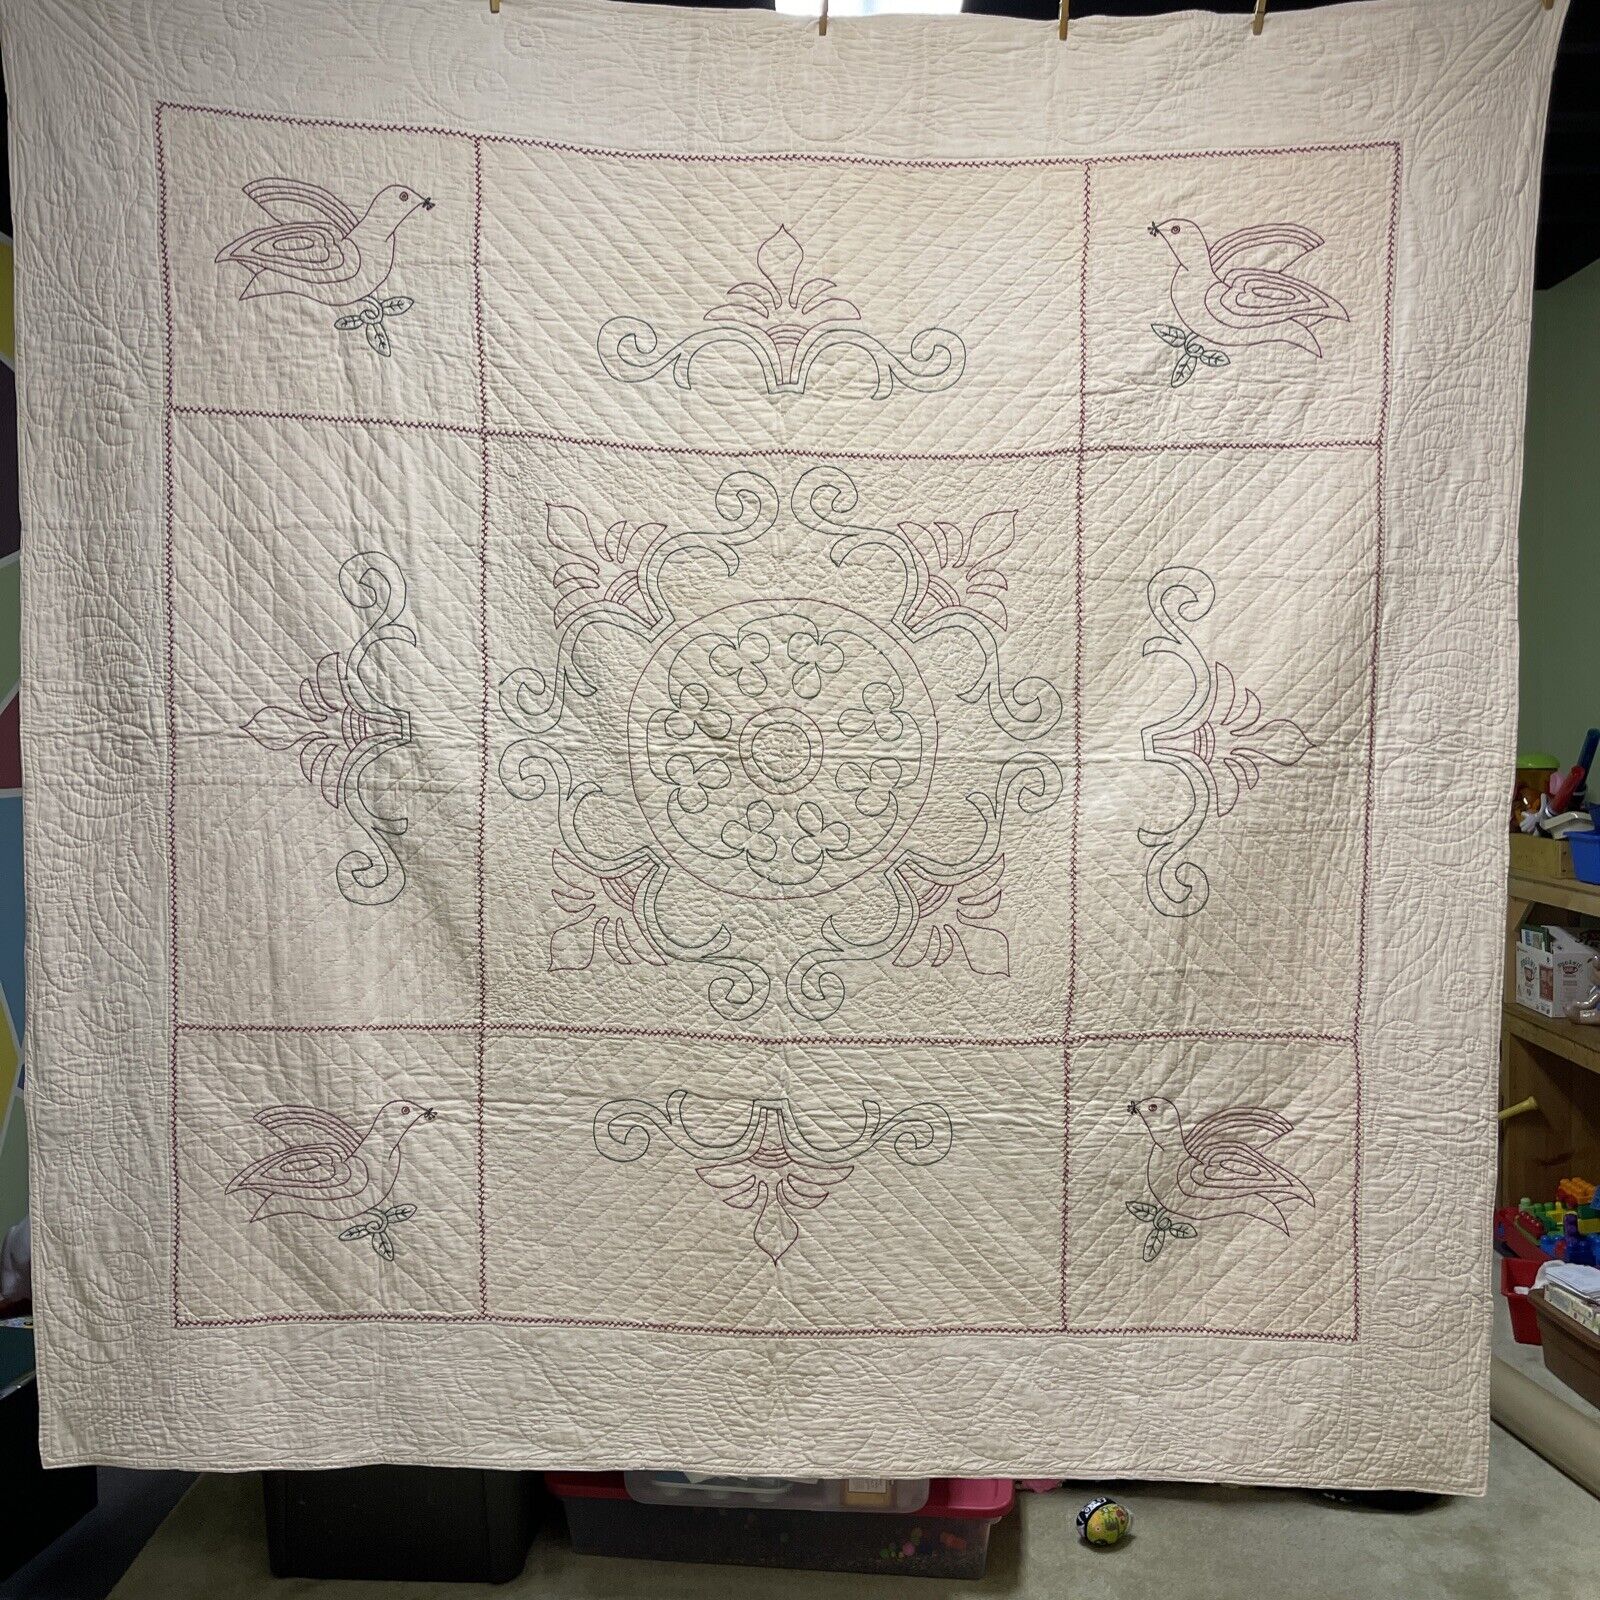 Stunning Vintage QUILT Approximately￼ 78x86￼ Embroidery medallion with birds